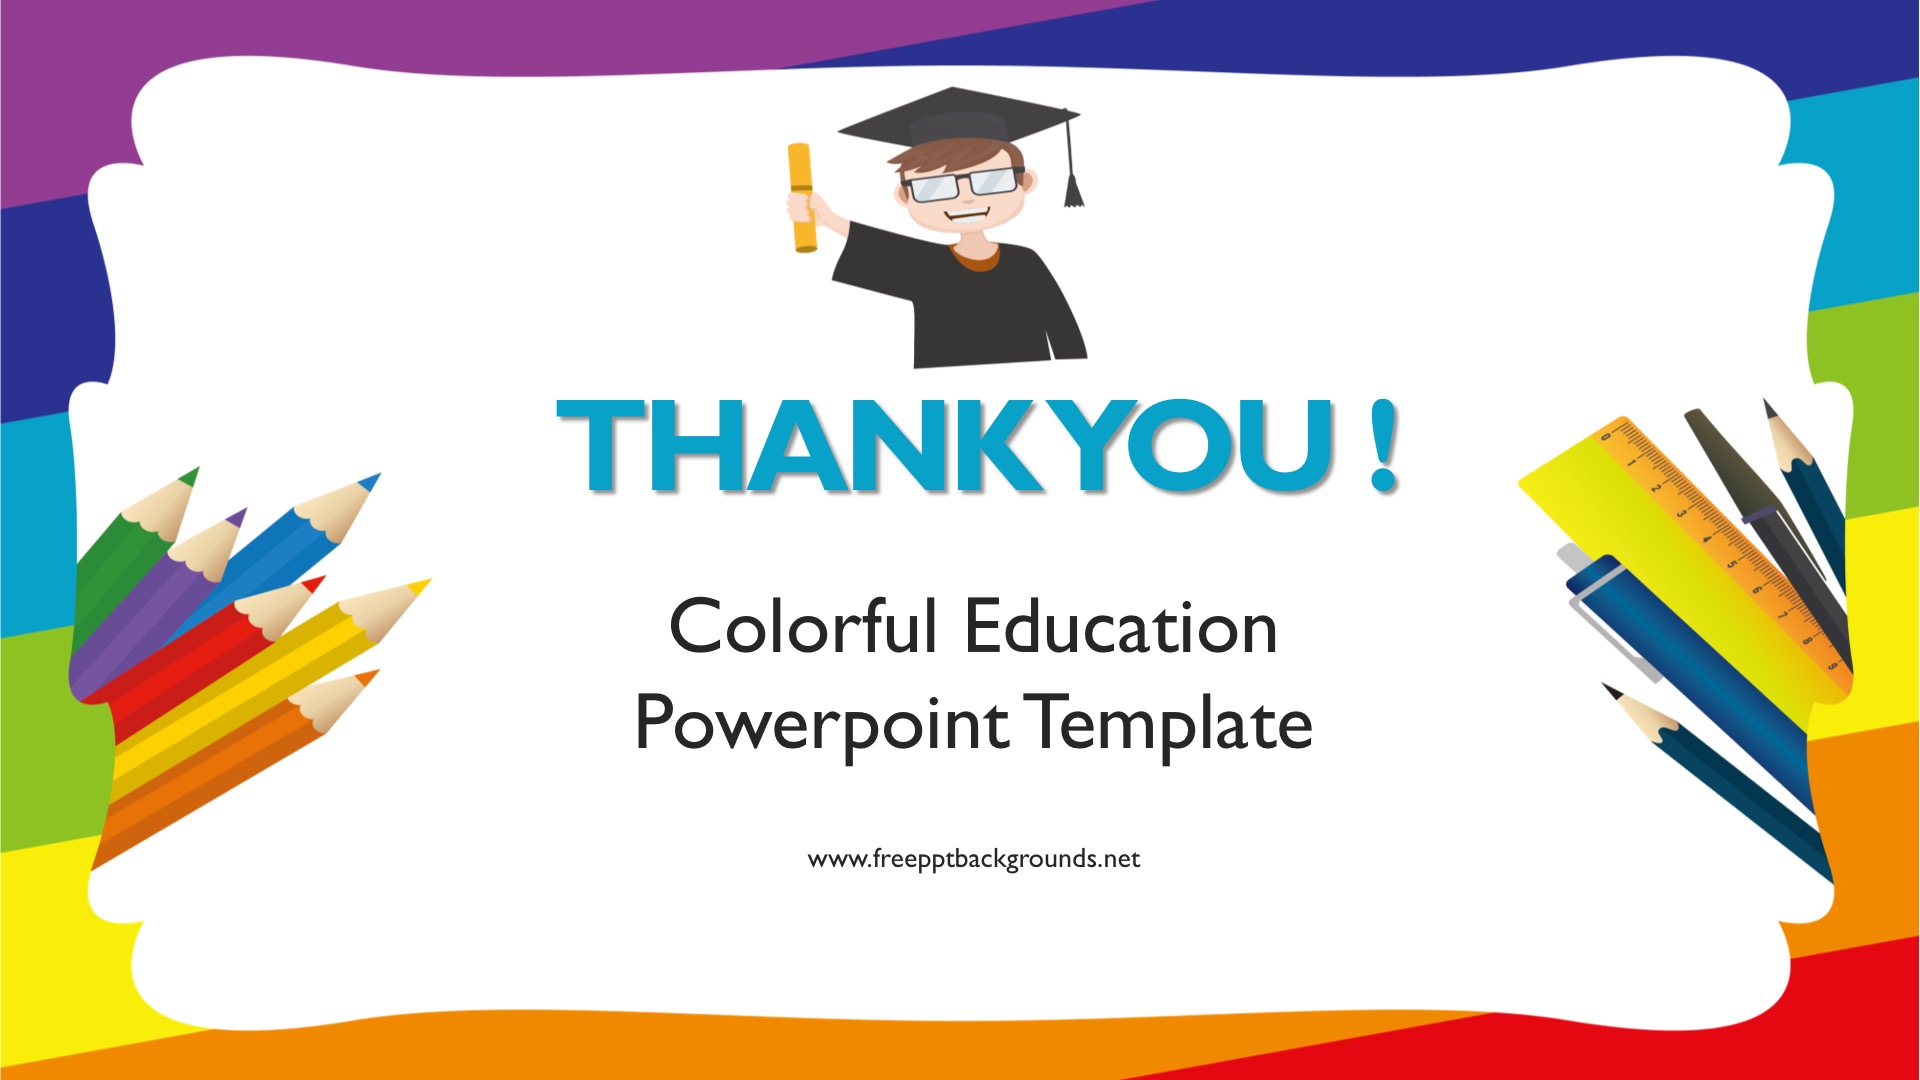 ppt free templates download education